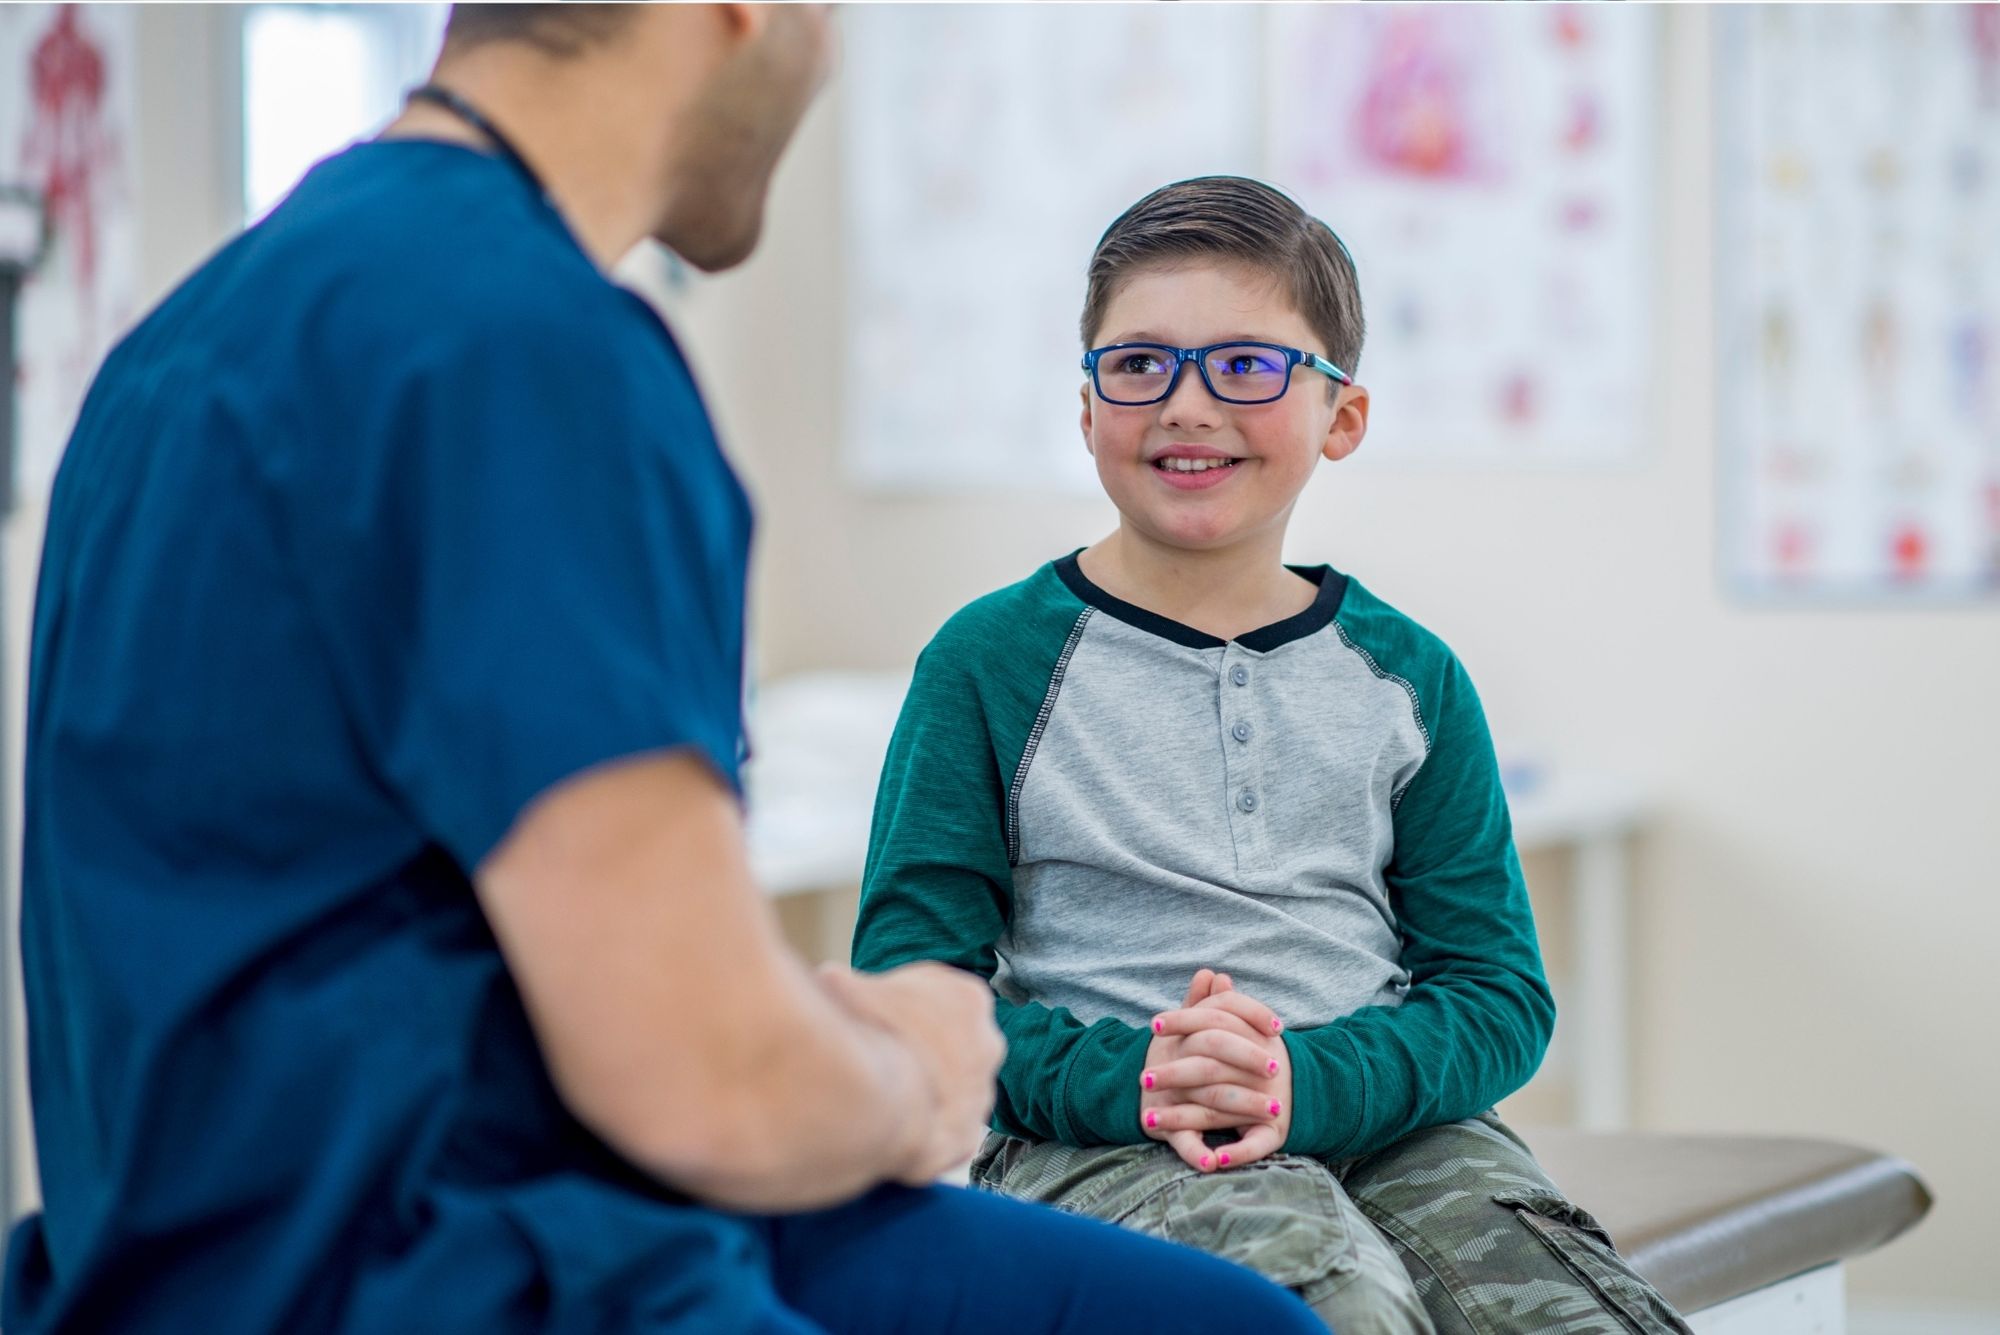 A young boy talking to a doctor